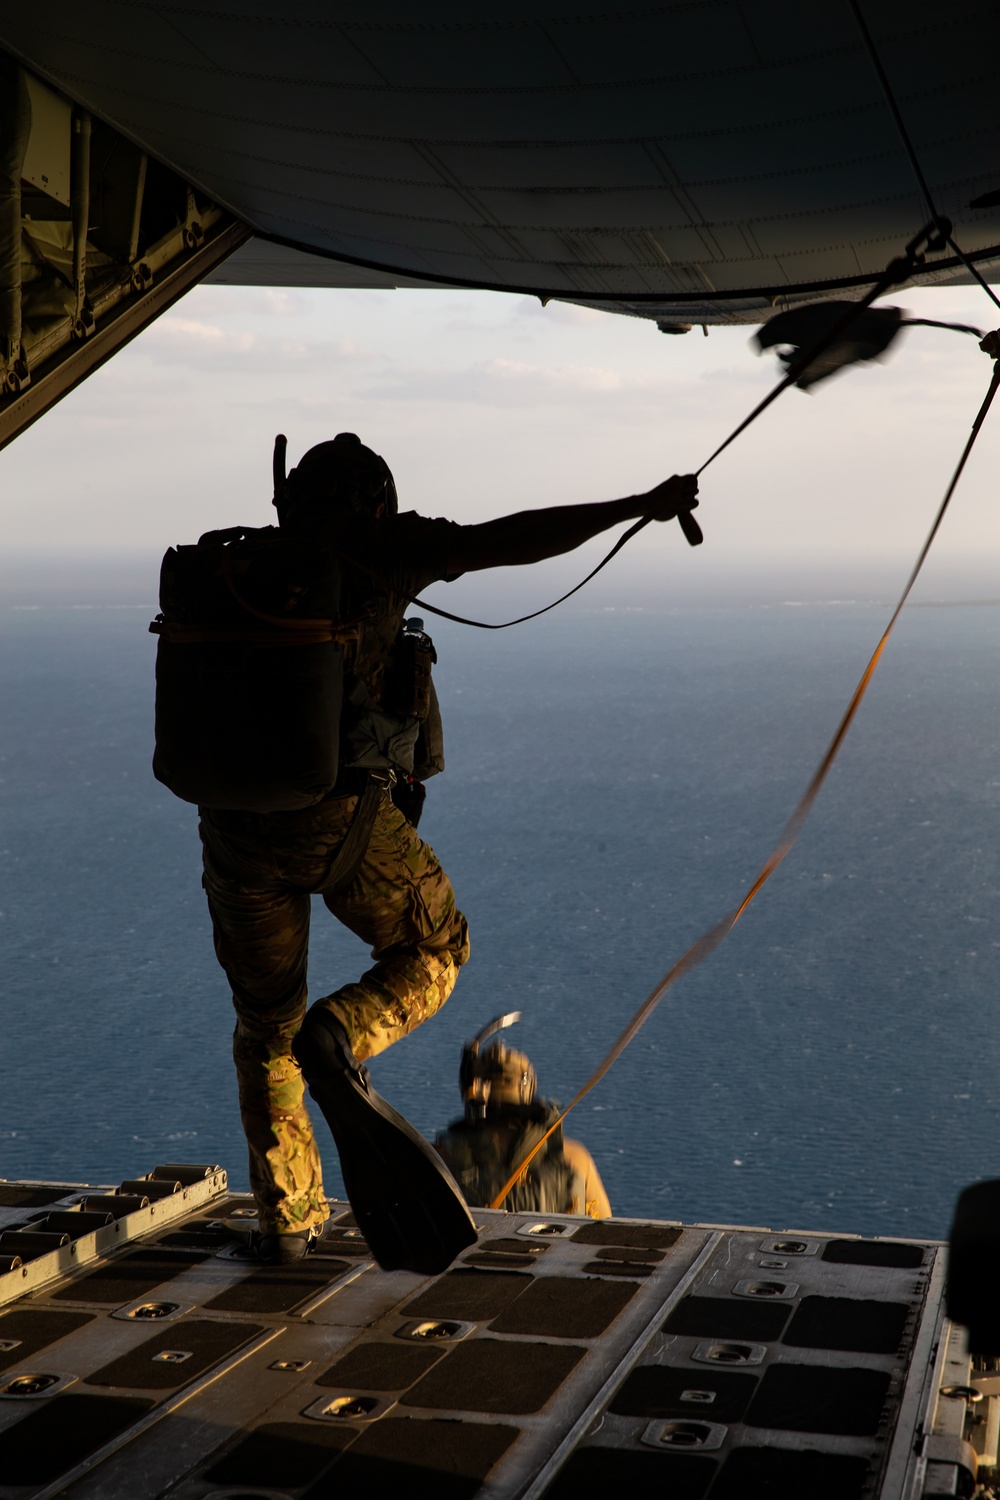 Wait for drop: VMGR-152 conducts joint air drop training with 320th Special Tactics Squadron